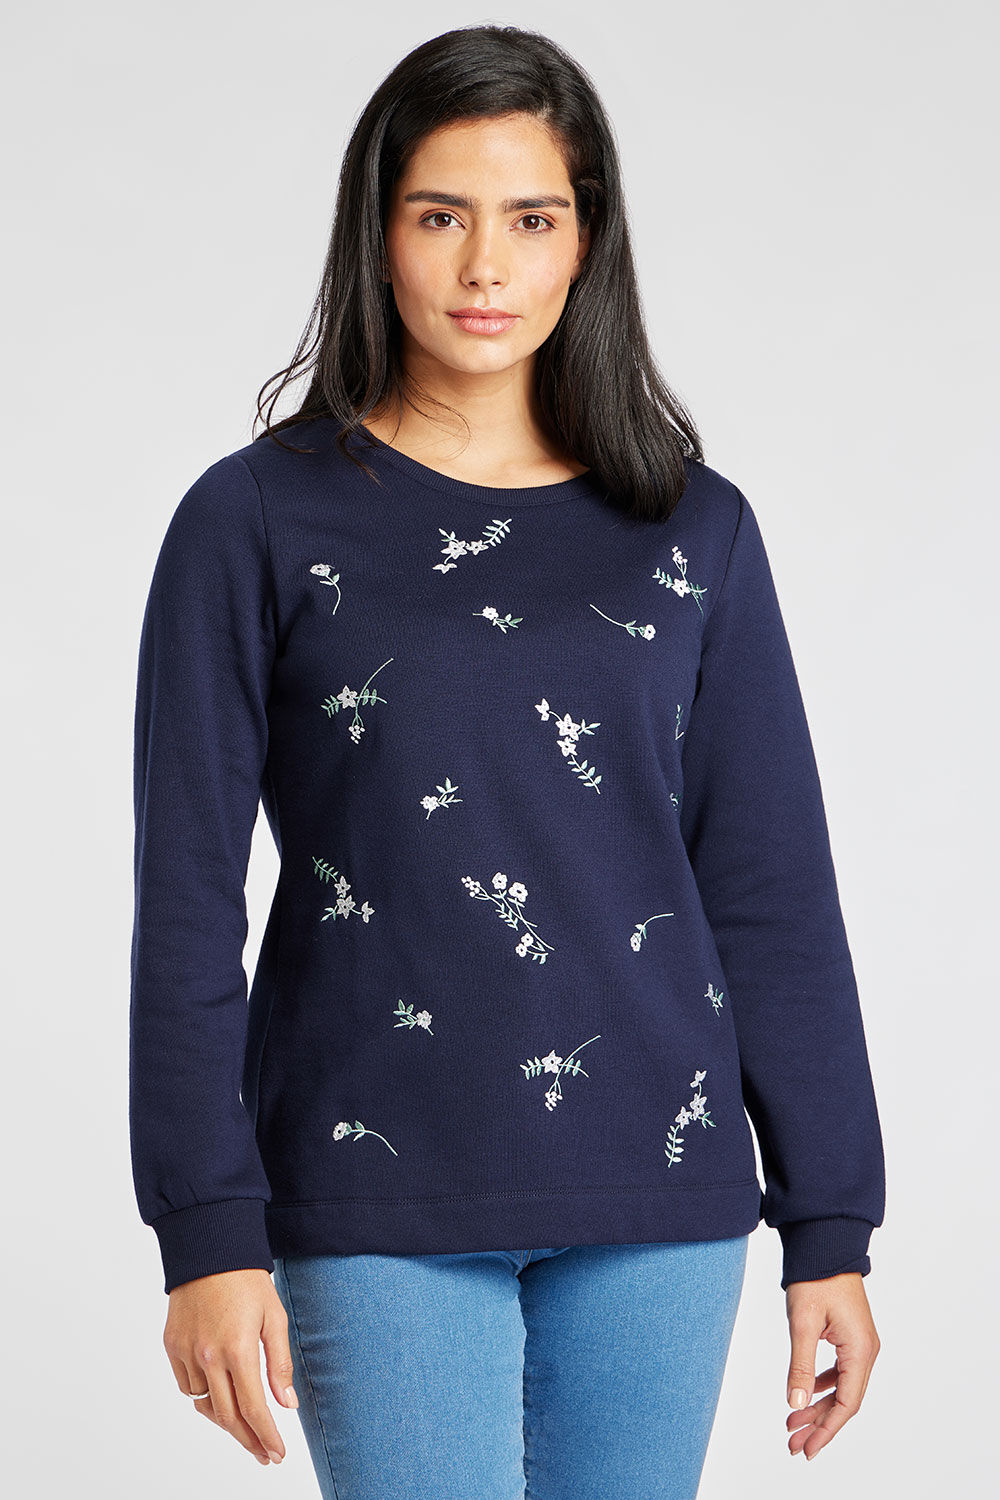 Bonmarche Navy Long Sleeve Embroidered Sprigs Sweatshirt, Size: 14